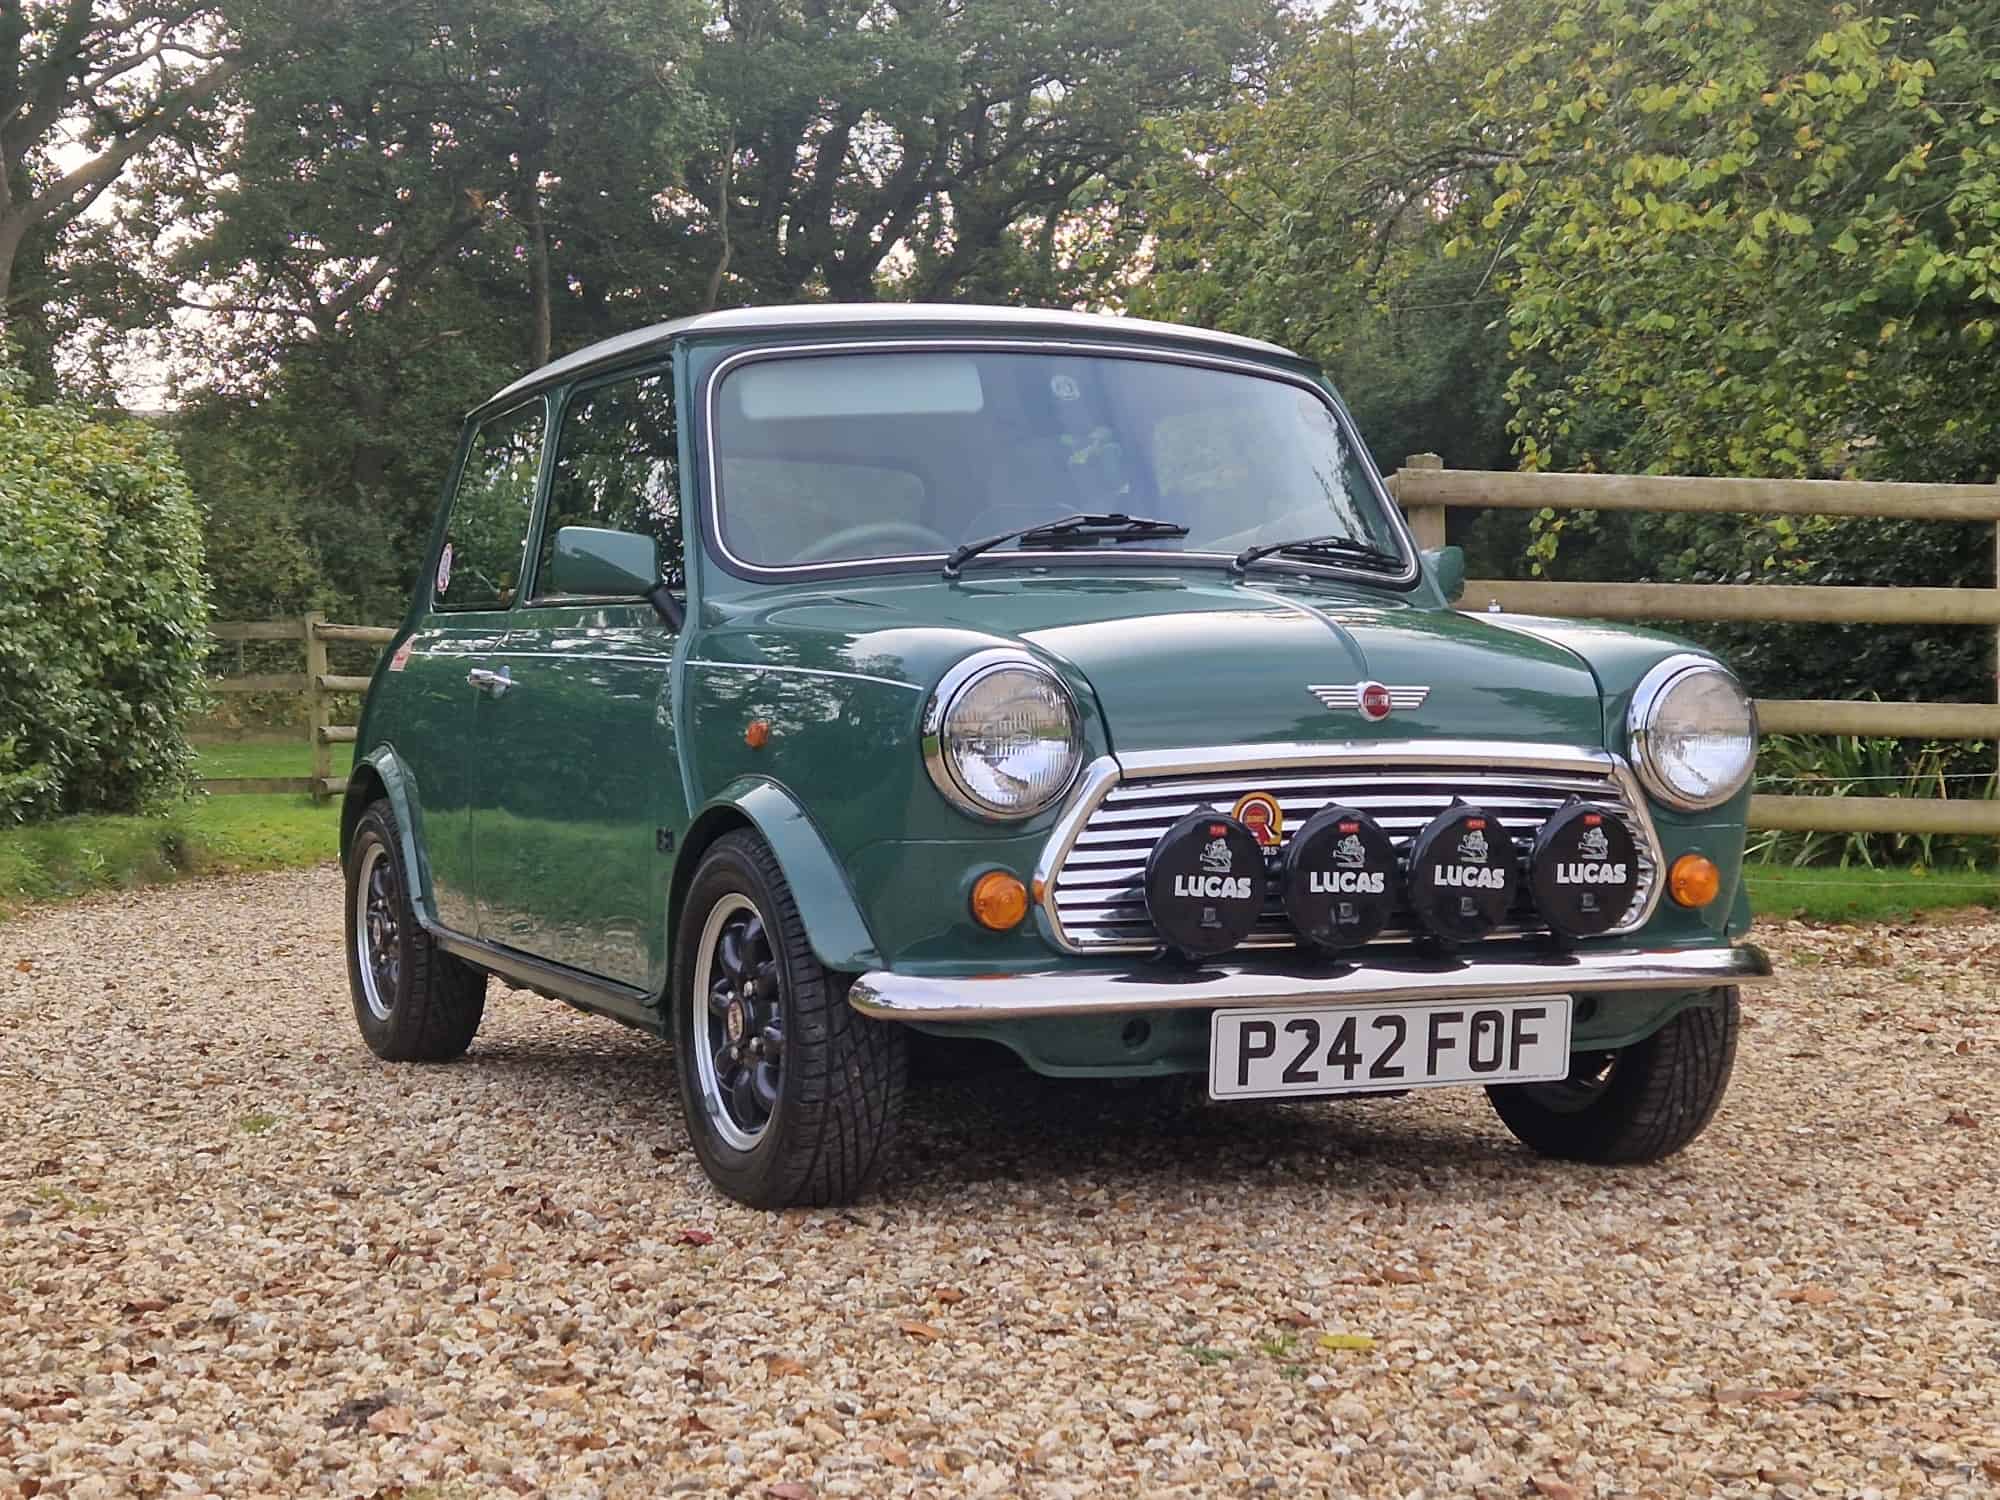 ** NOW SOLD ** Outstanding Mini Cooper 35 1 Of 200 Ever Made On 4275 Miles From New!